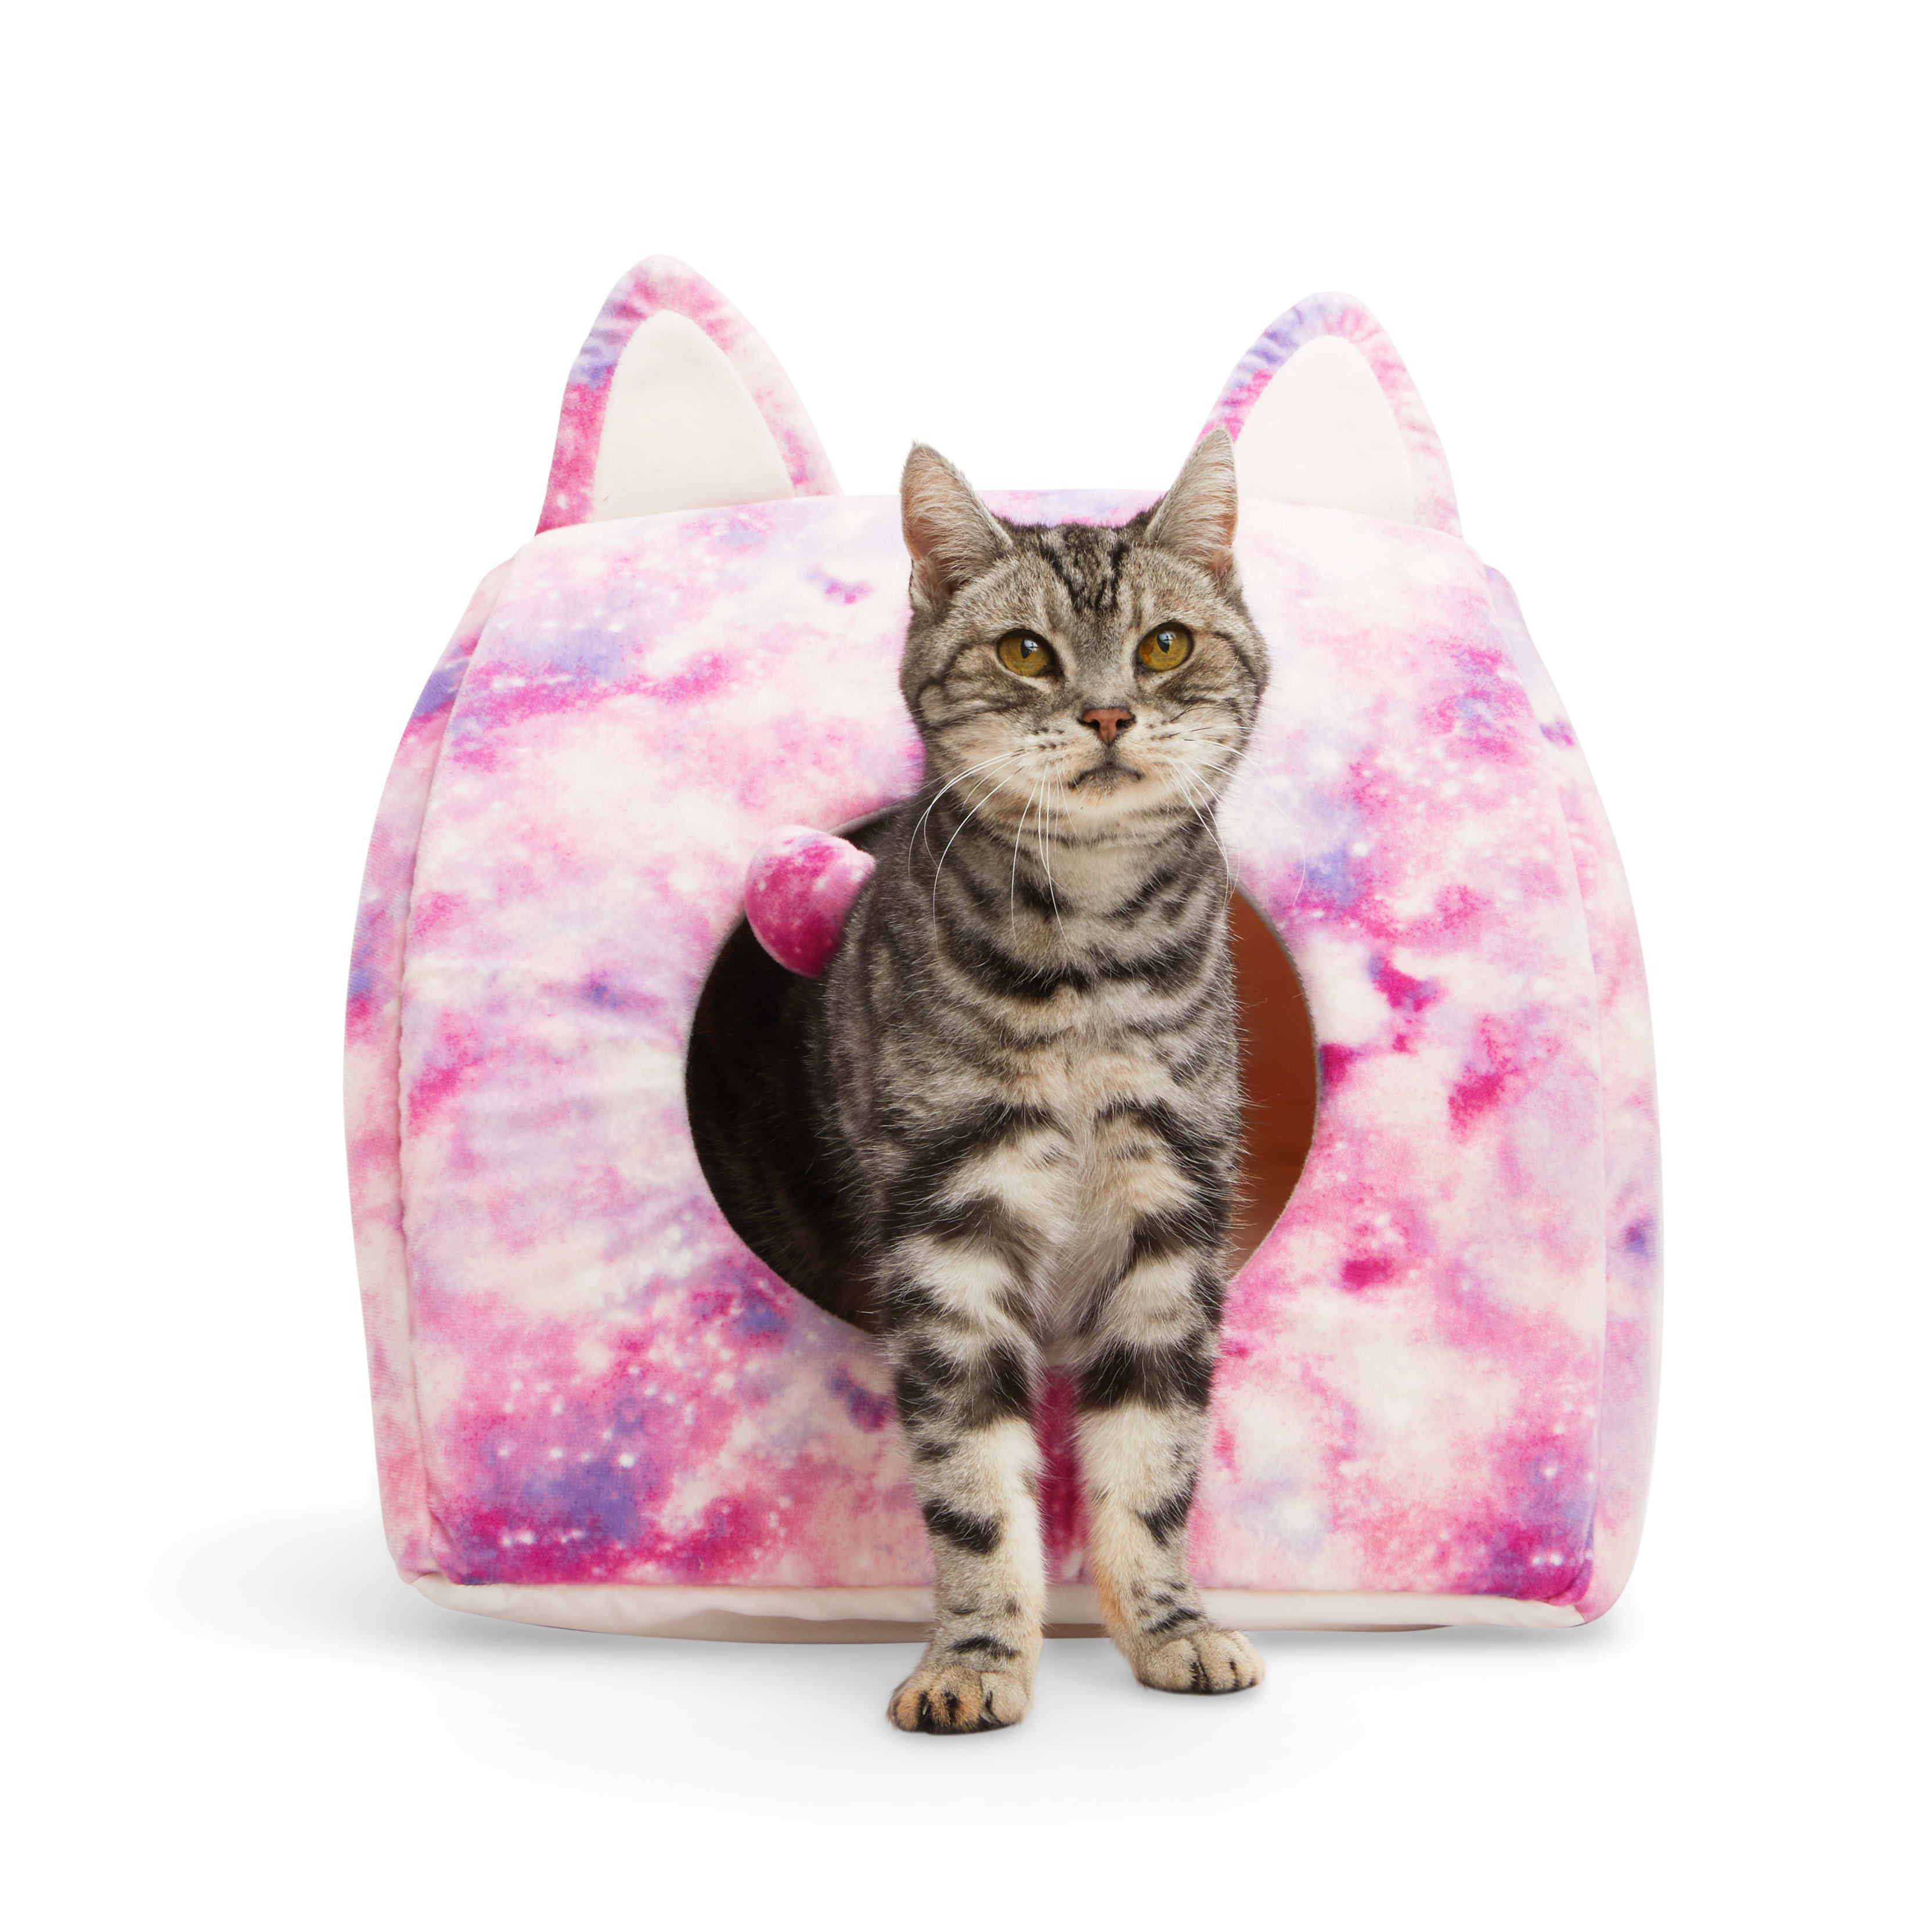 EveryYay Snooze Fest Straw Play Cave Cat Bed, 16.5 L X 14.2 W X 14.5 H